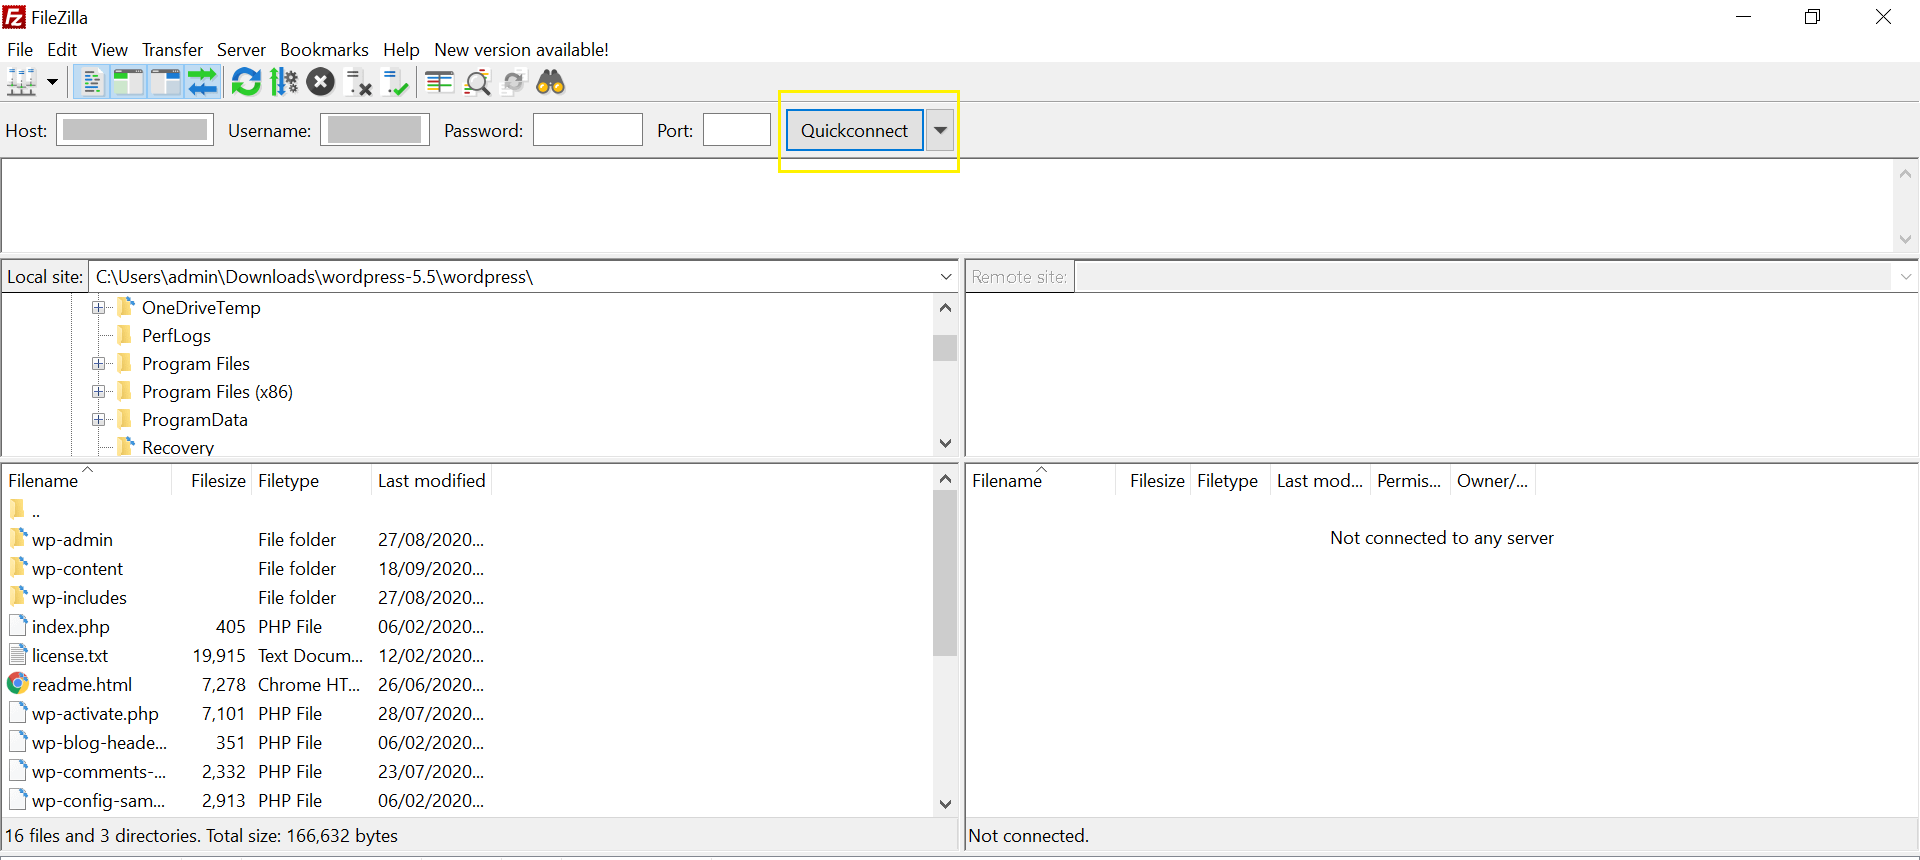 Connecting to a server via FTP with FileZilla.